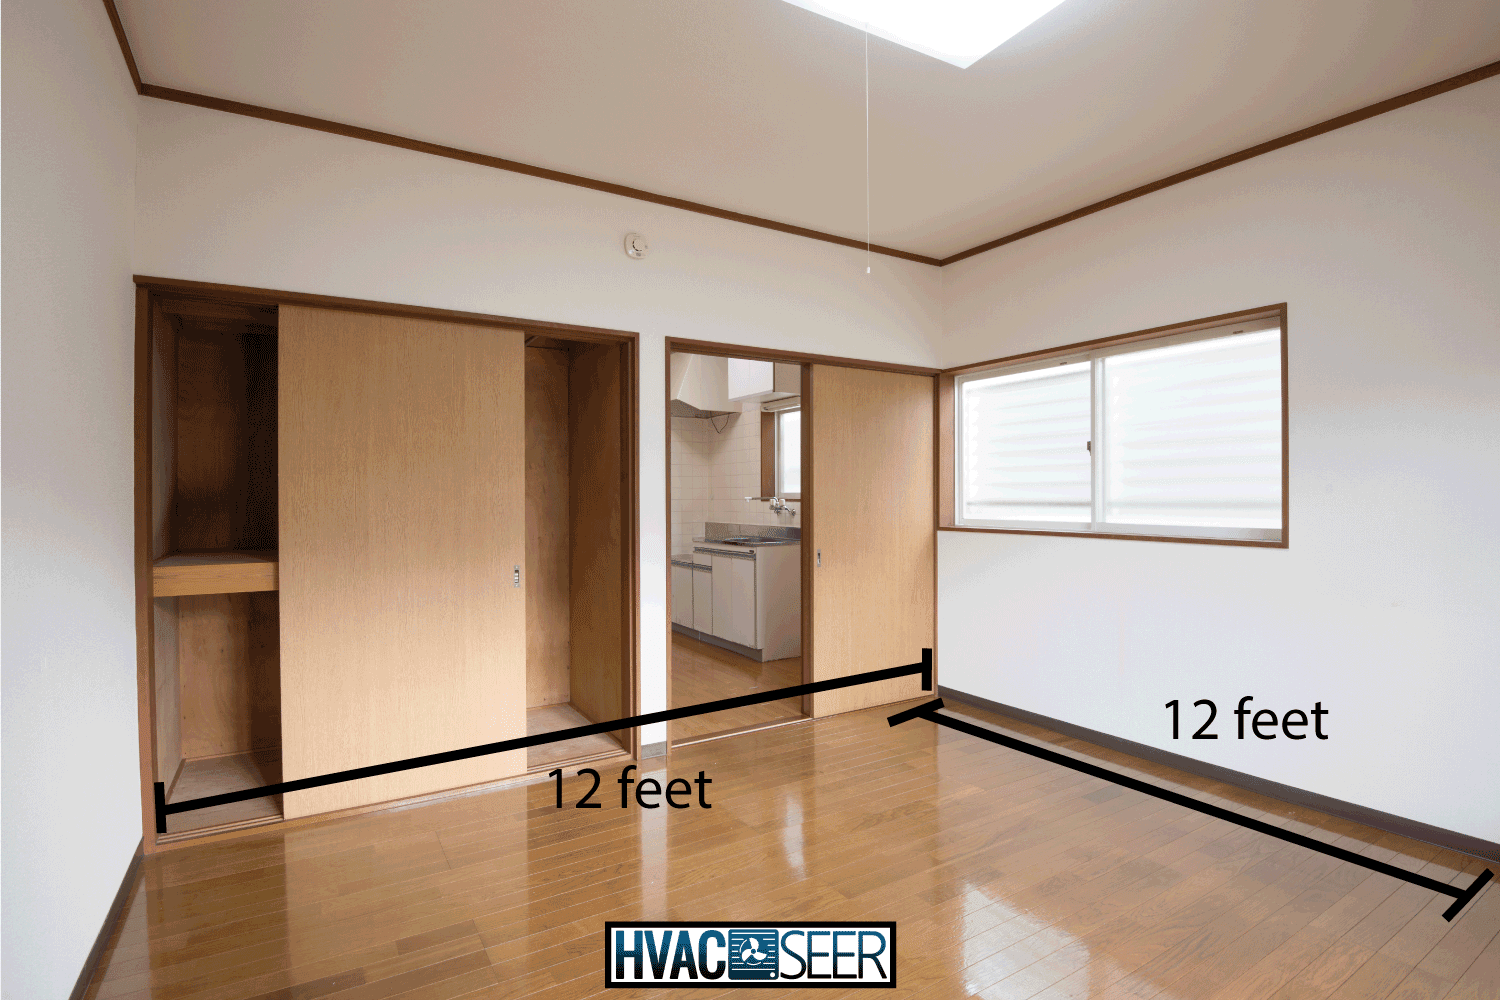 12 by 12 feet vacant room with wooden floor and cabinet. How Many BTU For 12X12 Room [Everything You Need To Know]